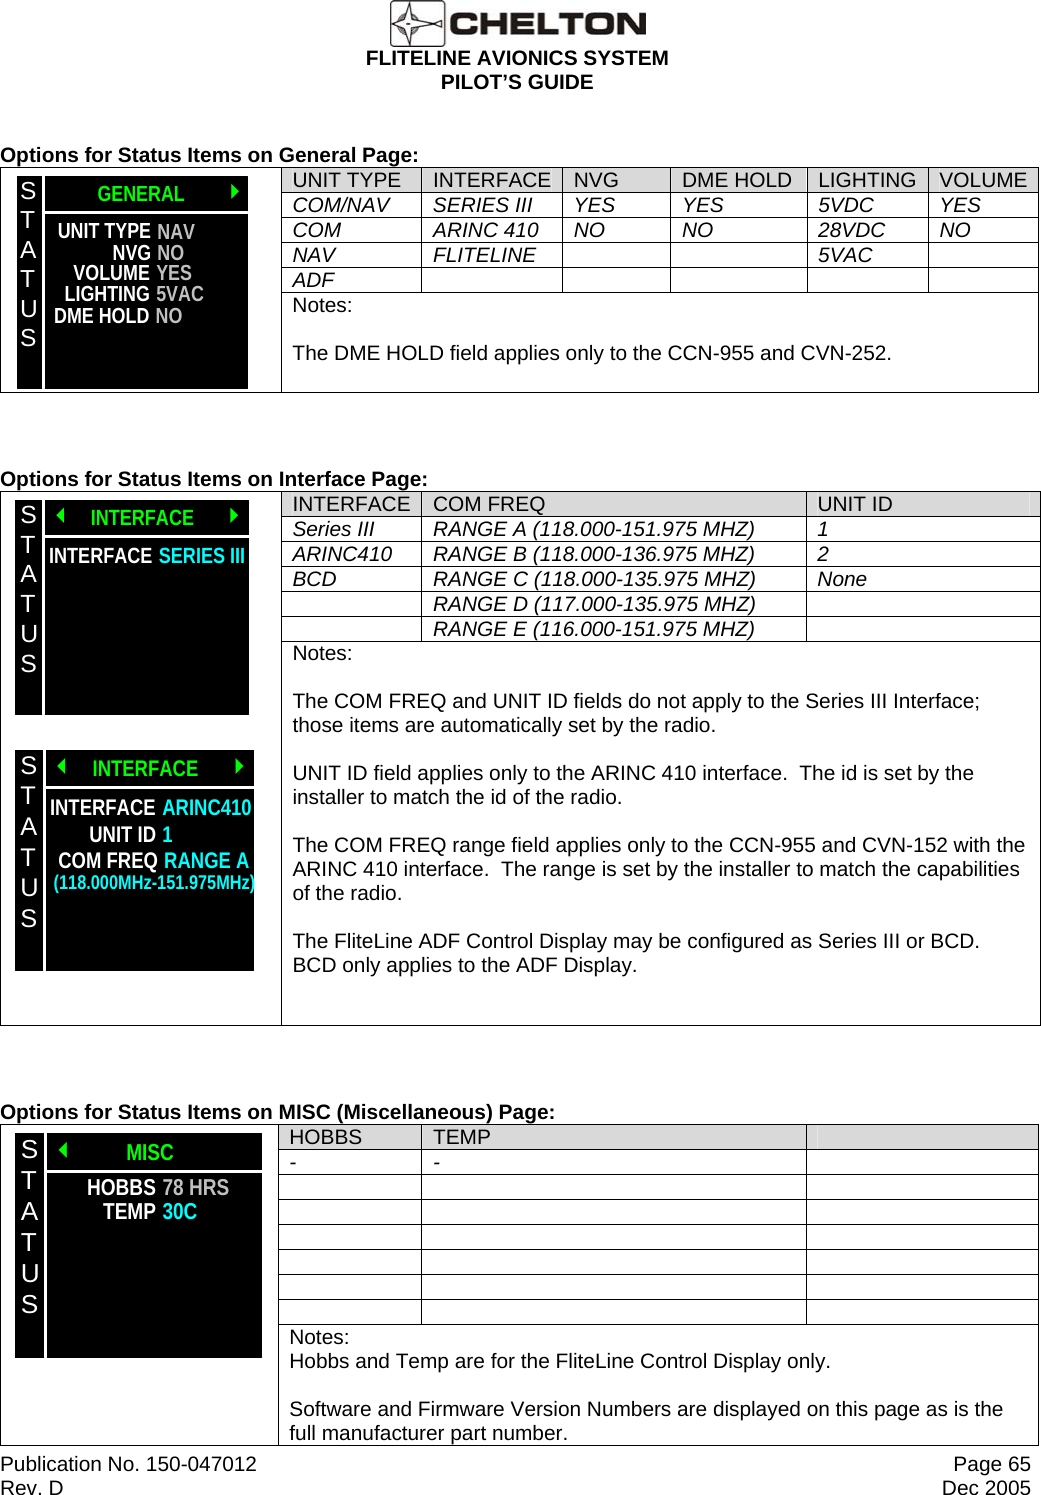  FLITELINE AVIONICS SYSTEM PILOT’S GUIDE  Publication No. 150-047012  Page 65 Rev. D  Dec 2005 Options for Status Items on General Page: UNIT TYPE  INTERFACE NVG  DME HOLD  LIGHTING VOLUMECOM/NAV SERIES III YES  YES  5VDC  YES COM ARINC 410 NO NO  28VDC NO NAV FLITELINE     5VAC  ADF          STATUSUNIT TYPE NAVNVG NODME HOLD NOLIGHTING 5VACVOLUME YESGENERAL Notes:   The DME HOLD field applies only to the CCN-955 and CVN-252.  Options for Status Items on Interface Page: INTERFACE COM FREQ  UNIT ID Series III  RANGE A (118.000-151.975 MHZ)  1 ARINC410  RANGE B (118.000-136.975 MHZ)  2 BCD  RANGE C (118.000-135.975 MHZ)  None   RANGE D (117.000-135.975 MHZ)     RANGE E (116.000-151.975 MHZ)   STATUSINTERFACE SERIES IIIINTERFACE  STATUSINTERFACE ARINC410COM FREQ RANGE AINTERFACE(118.000MHz-151.975MHz)UNIT ID 1 Notes:   The COM FREQ and UNIT ID fields do not apply to the Series III Interface; those items are automatically set by the radio.   UNIT ID field applies only to the ARINC 410 interface.  The id is set by the installer to match the id of the radio.  The COM FREQ range field applies only to the CCN-955 and CVN-152 with the ARINC 410 interface.  The range is set by the installer to match the capabilities of the radio.  The FliteLine ADF Control Display may be configured as Series III or BCD.  BCD only applies to the ADF Display.    Options for Status Items on MISC (Miscellaneous) Page: HOBBS  TEMP   - -                           STATUSMISCHOBBS 78 HRSTEMP 30C Notes:  Hobbs and Temp are for the FliteLine Control Display only.  Software and Firmware Version Numbers are displayed on this page as is the full manufacturer part number. 